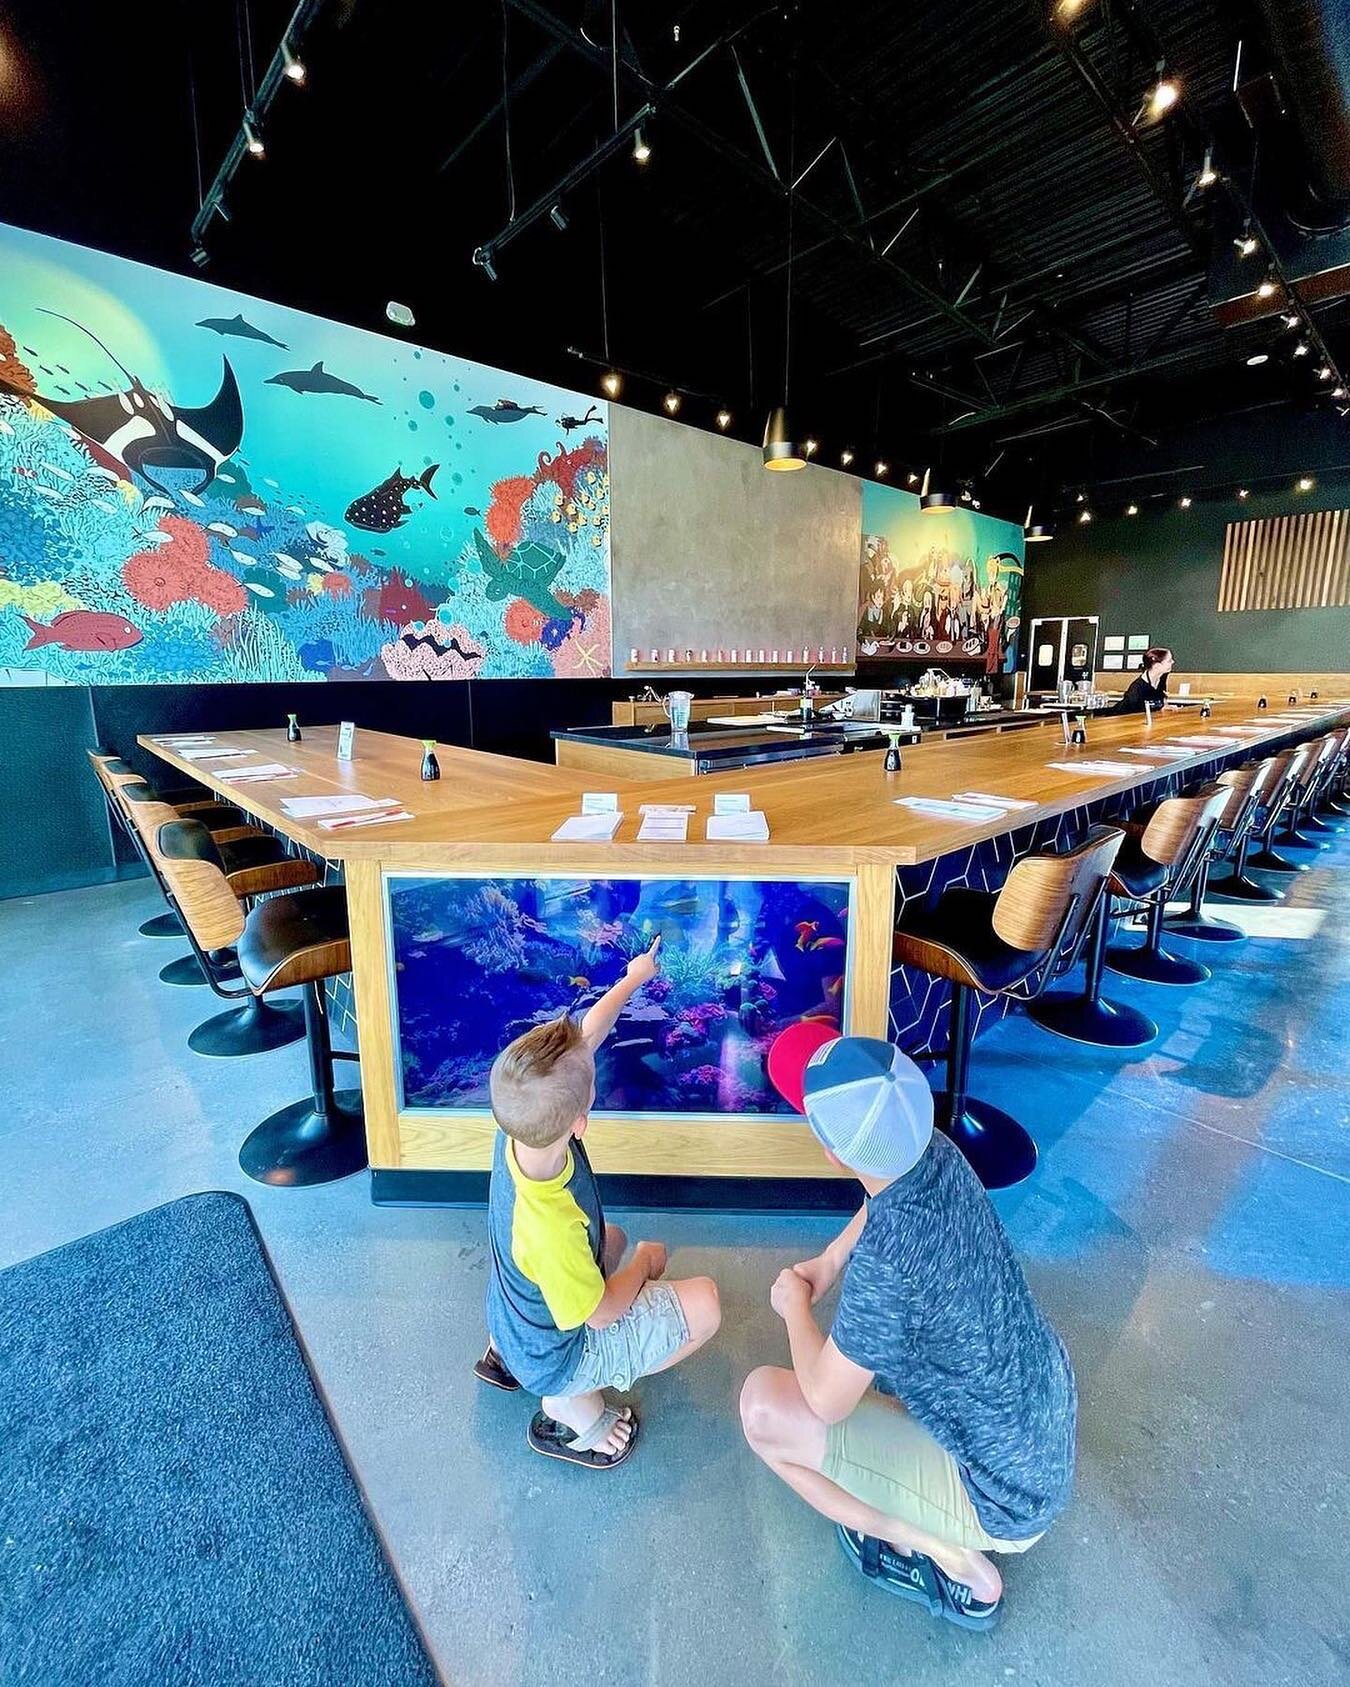 Bring the whole fam! We love seeing the joy in our kid friendly environment. For those without children, we hope that you will let that inner child out while you dine with us 🤪

Great shot from @utah.fun.guide 📷
.
.
.
.
.
#utahfoodie&nbsp;#izakaya 